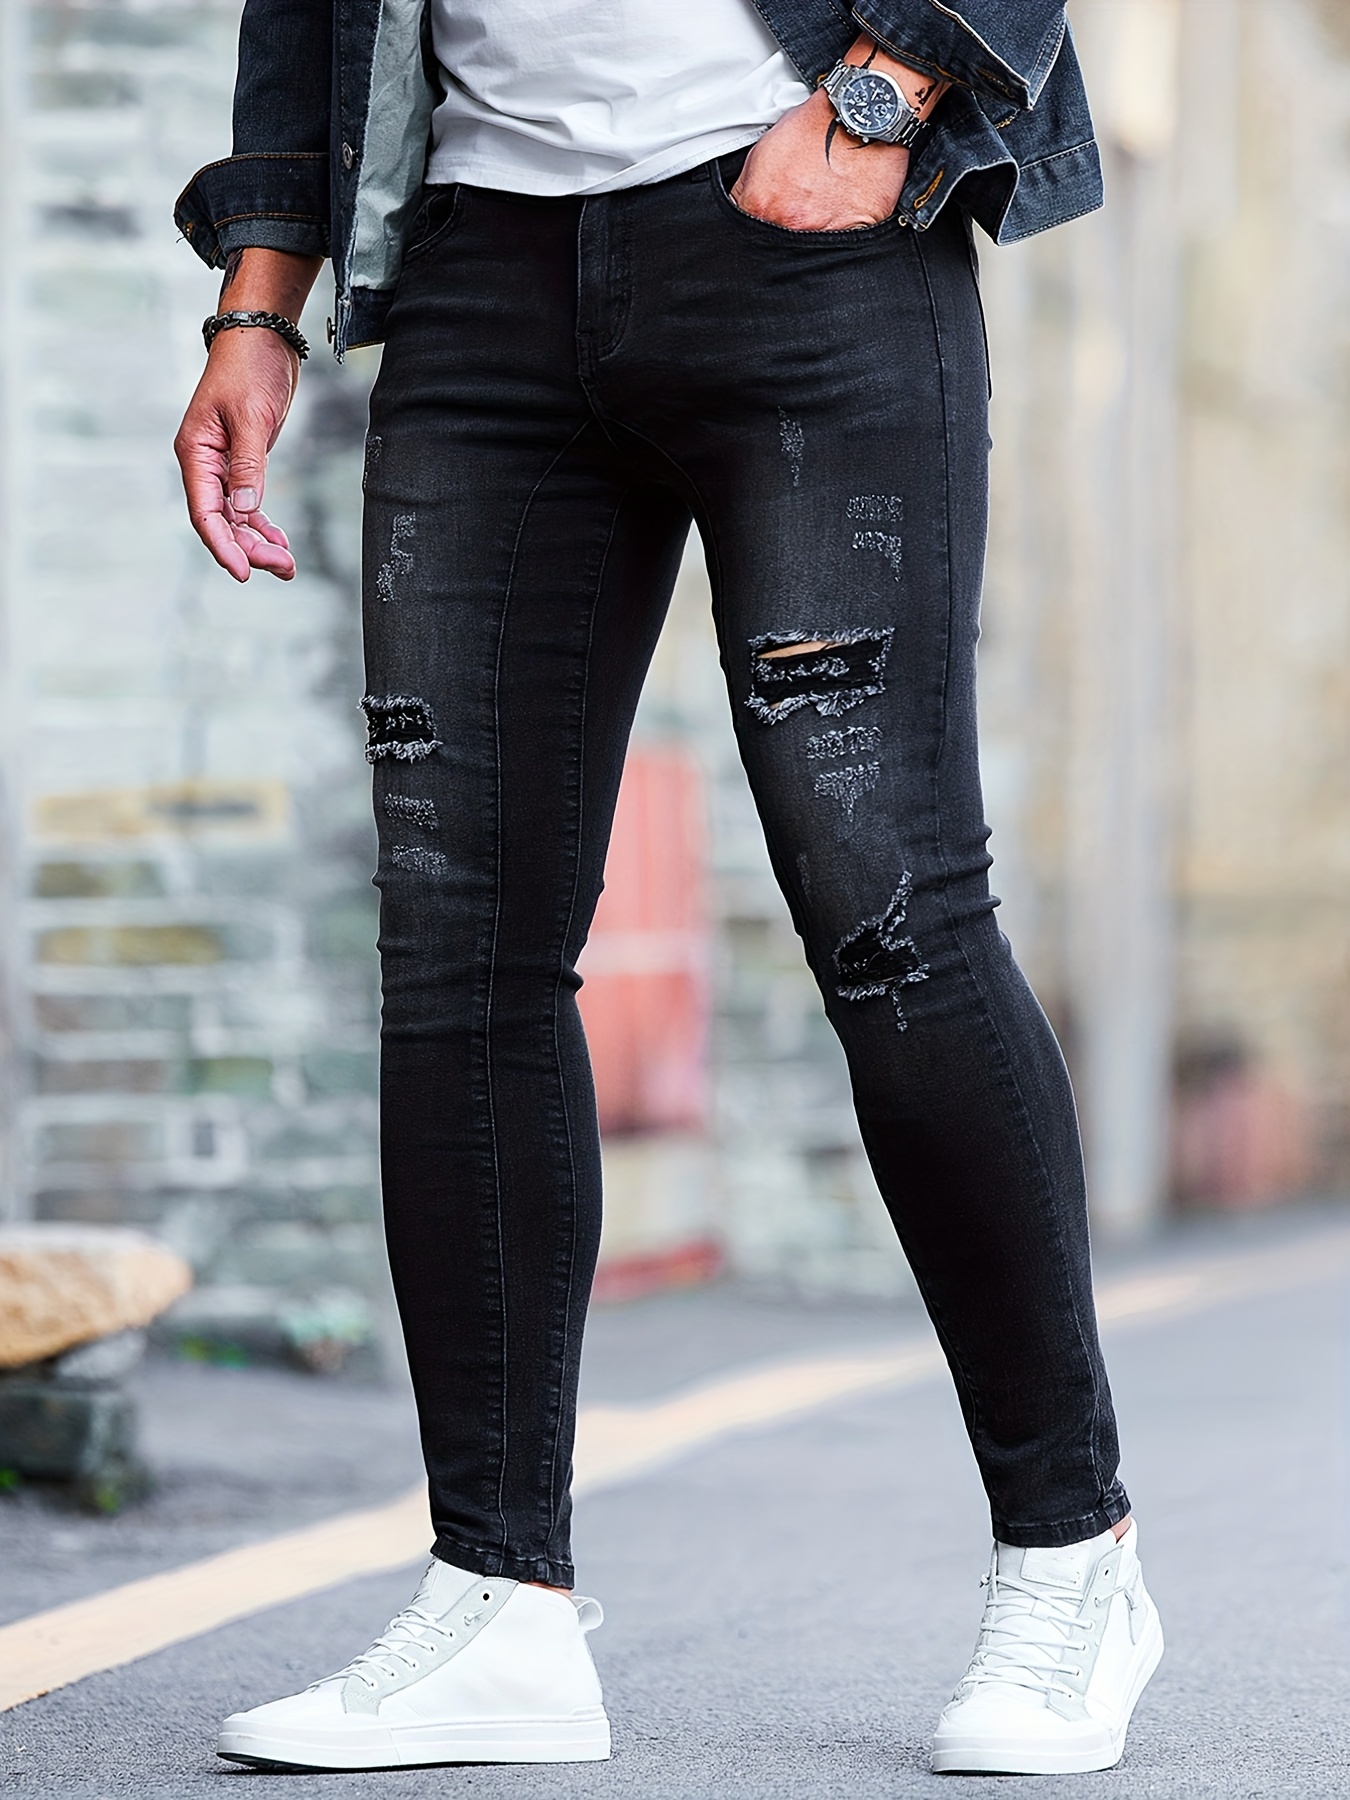 Slim Fit Ripped Jeans, Men's Casual Street Style Distressed Stretch Denim  Pants